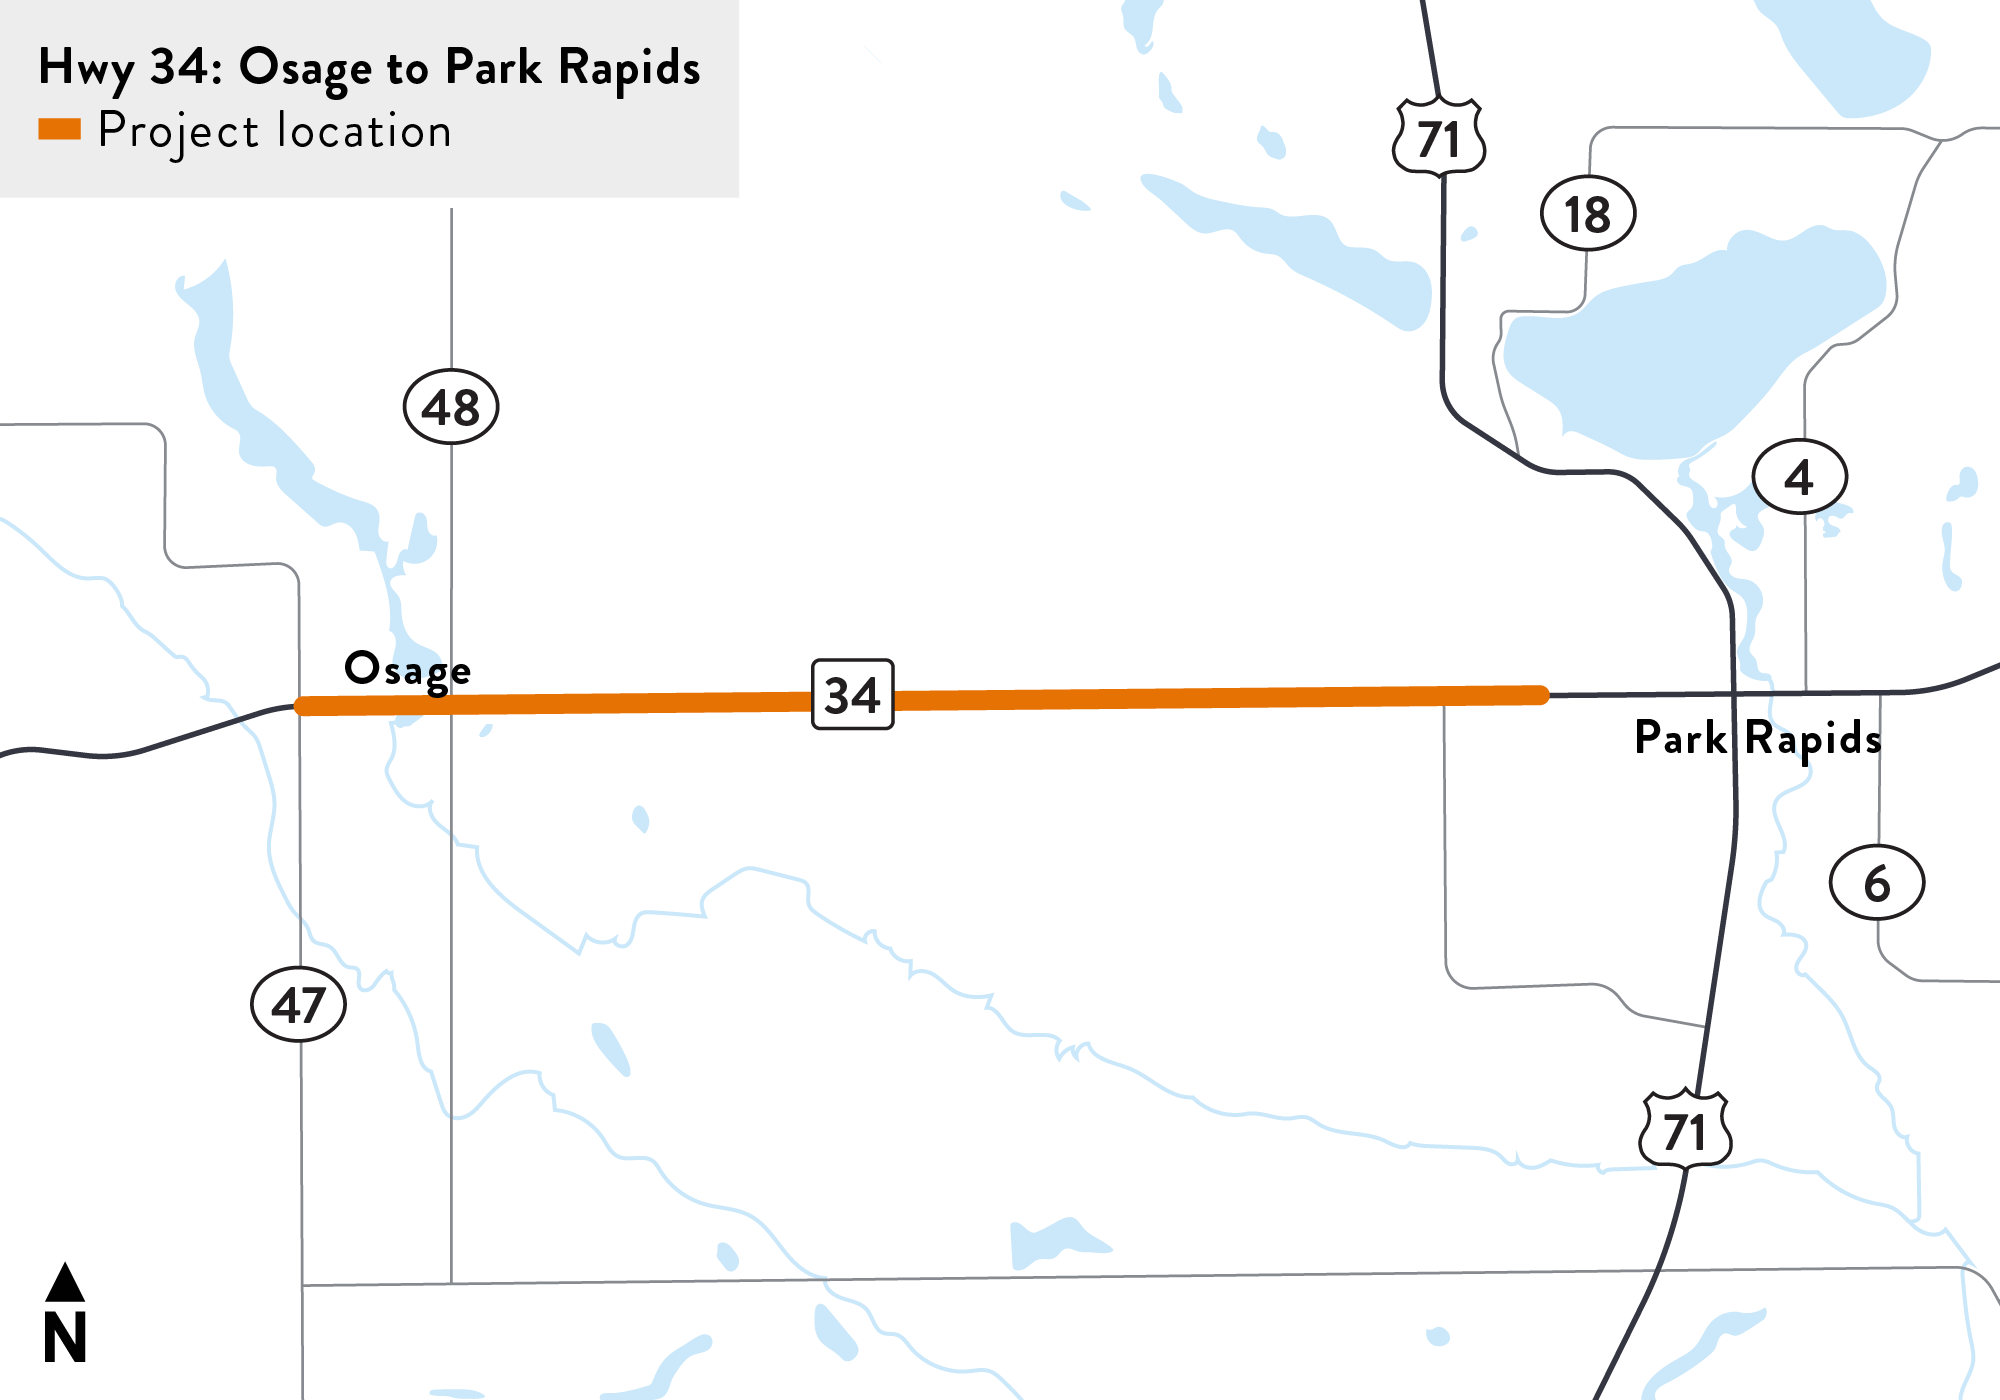 Highway 34 Osage to Park Rapids work zone